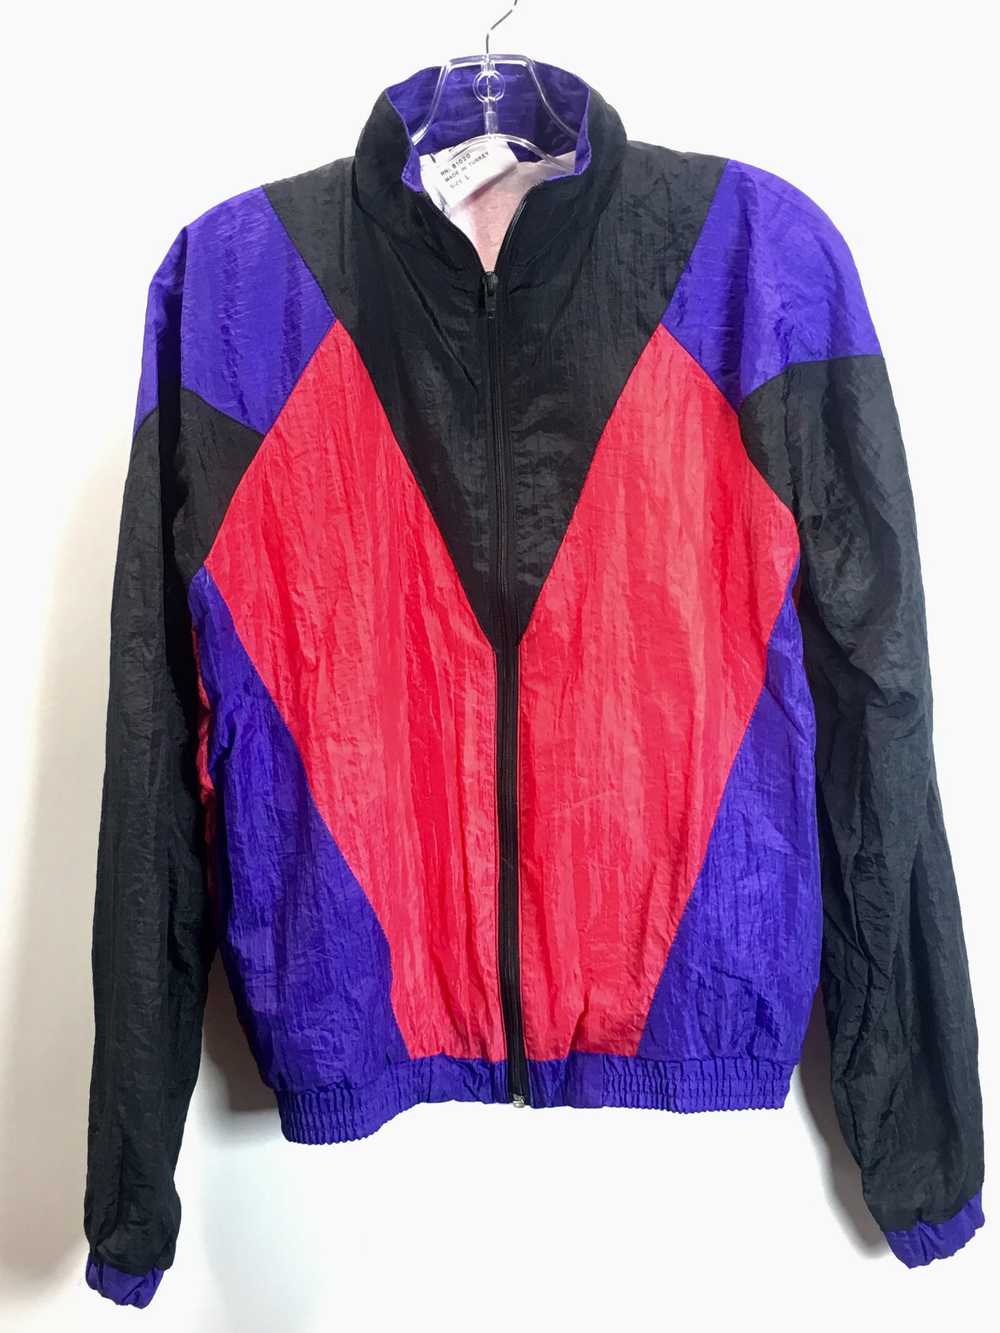 80s Teen Track Suit - image 2